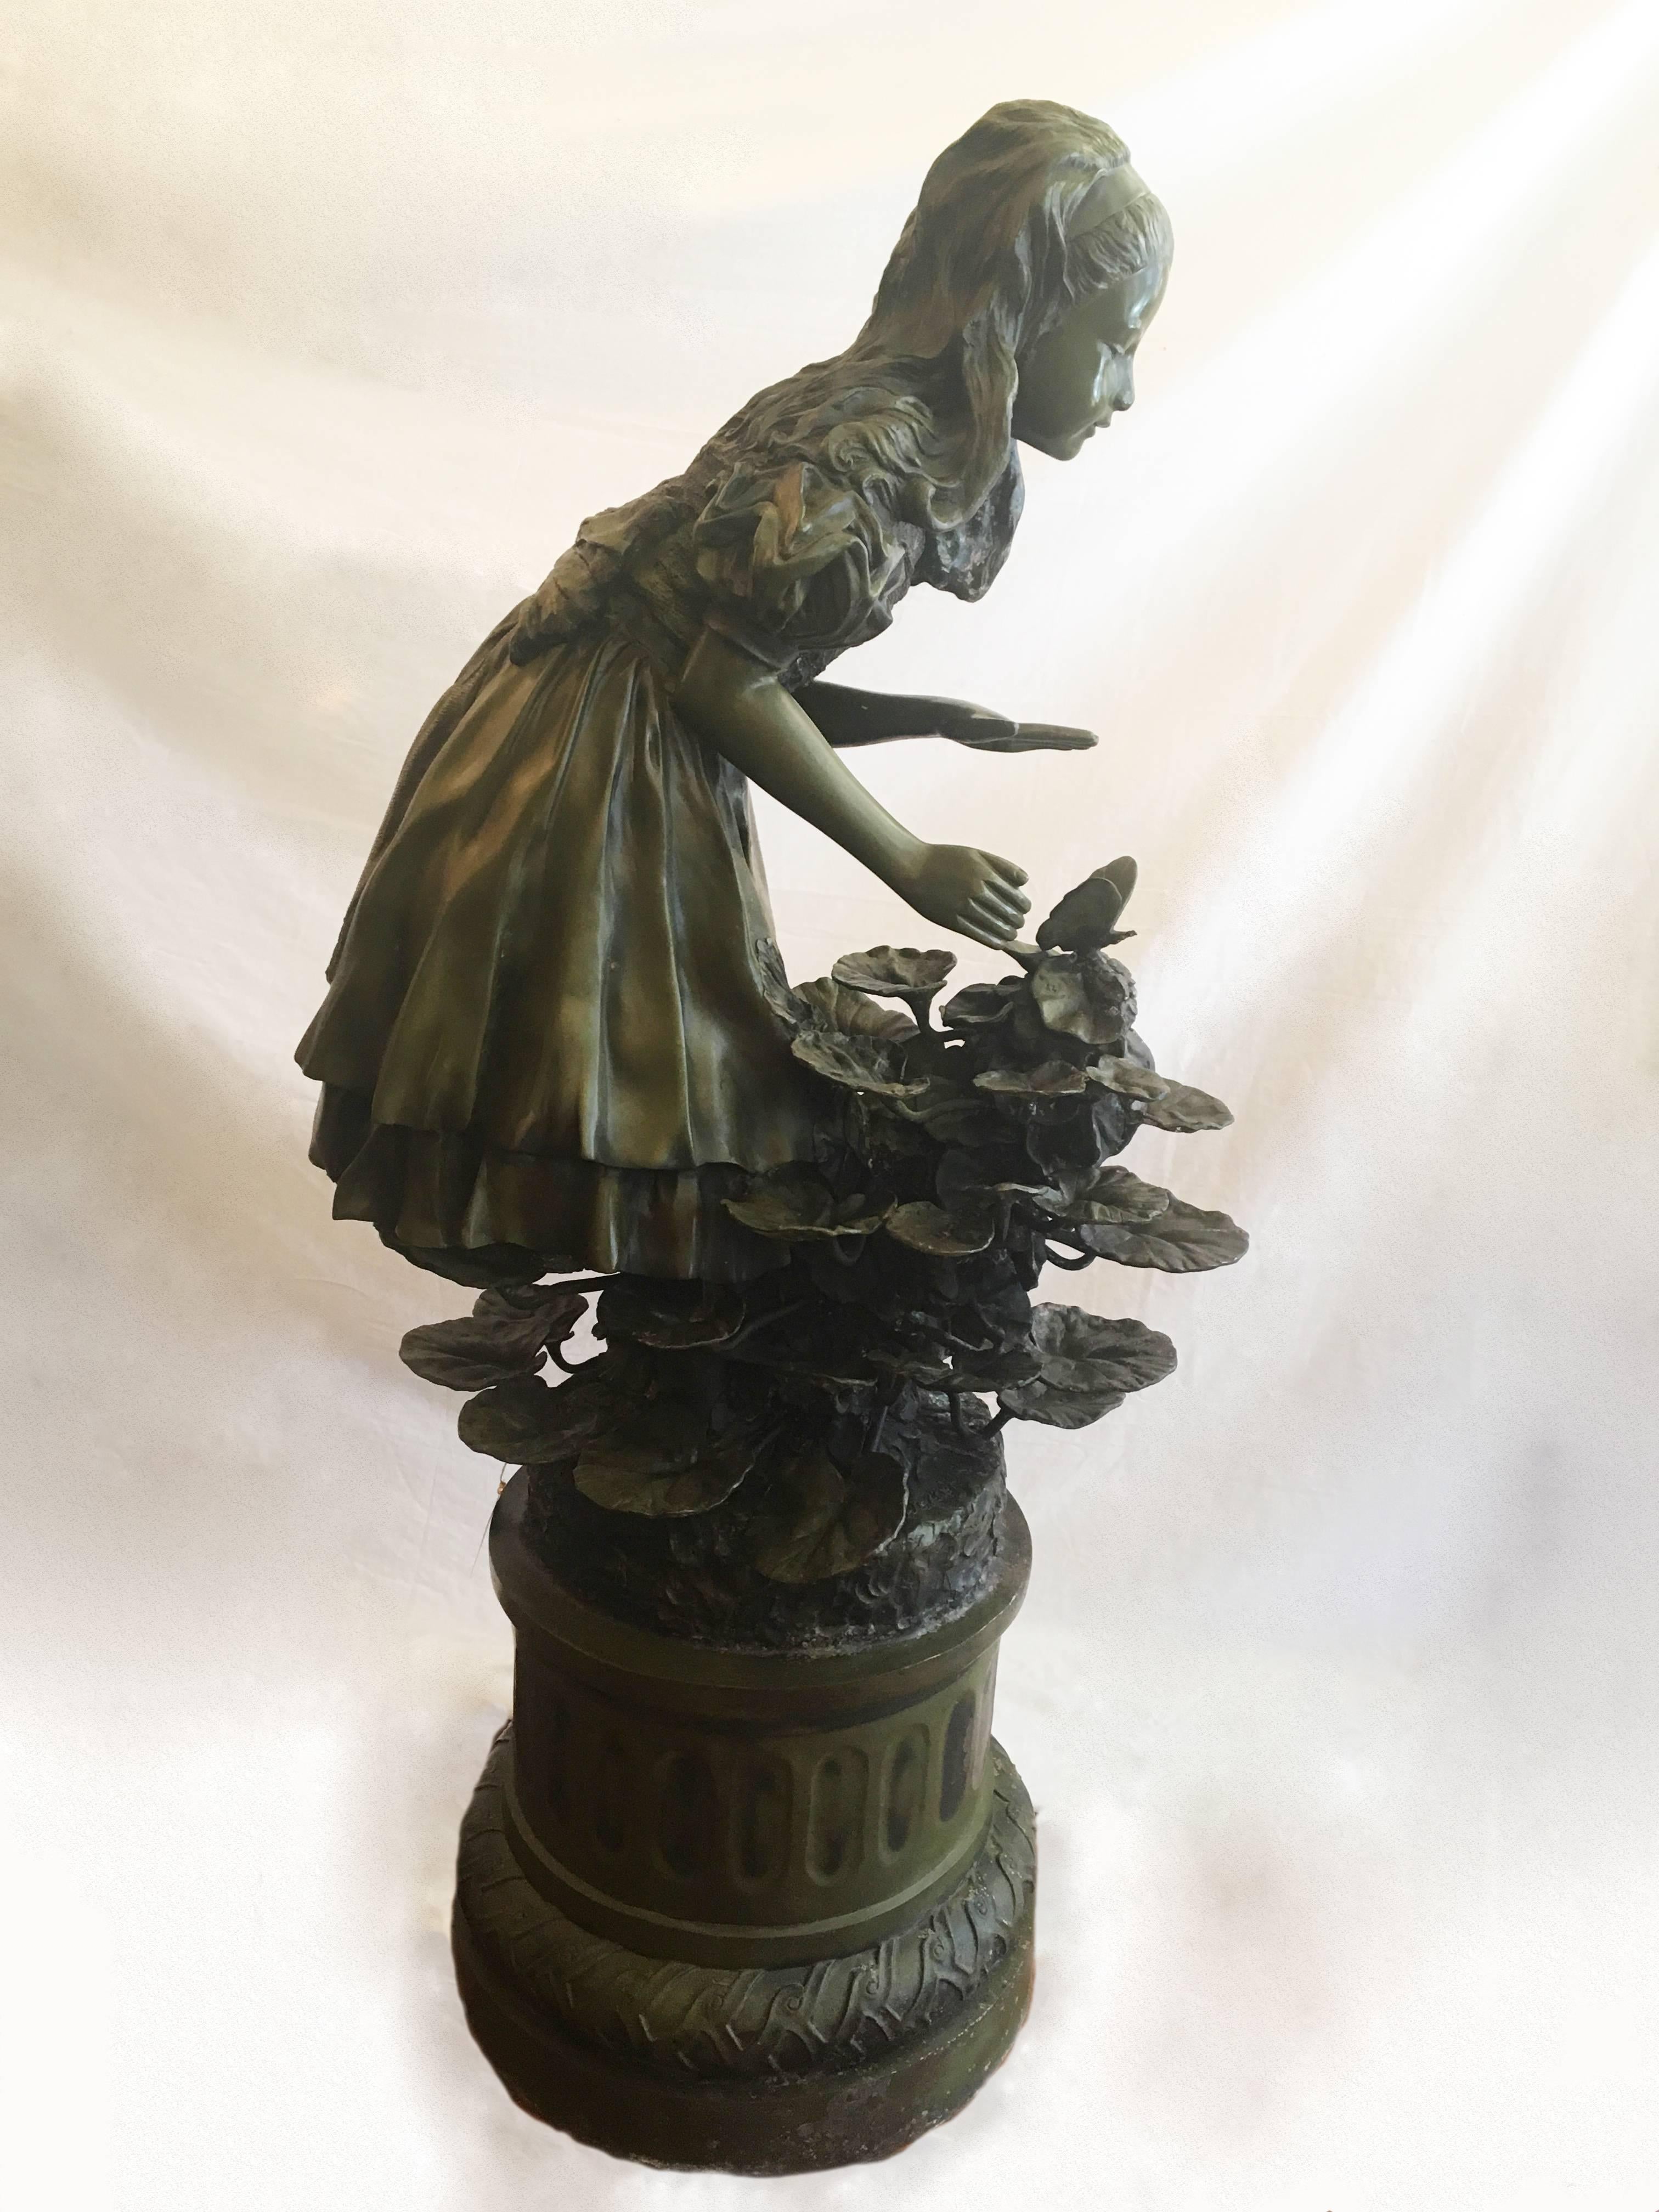 This 1900s French bronze over Iron lifesize statue/fountain of 